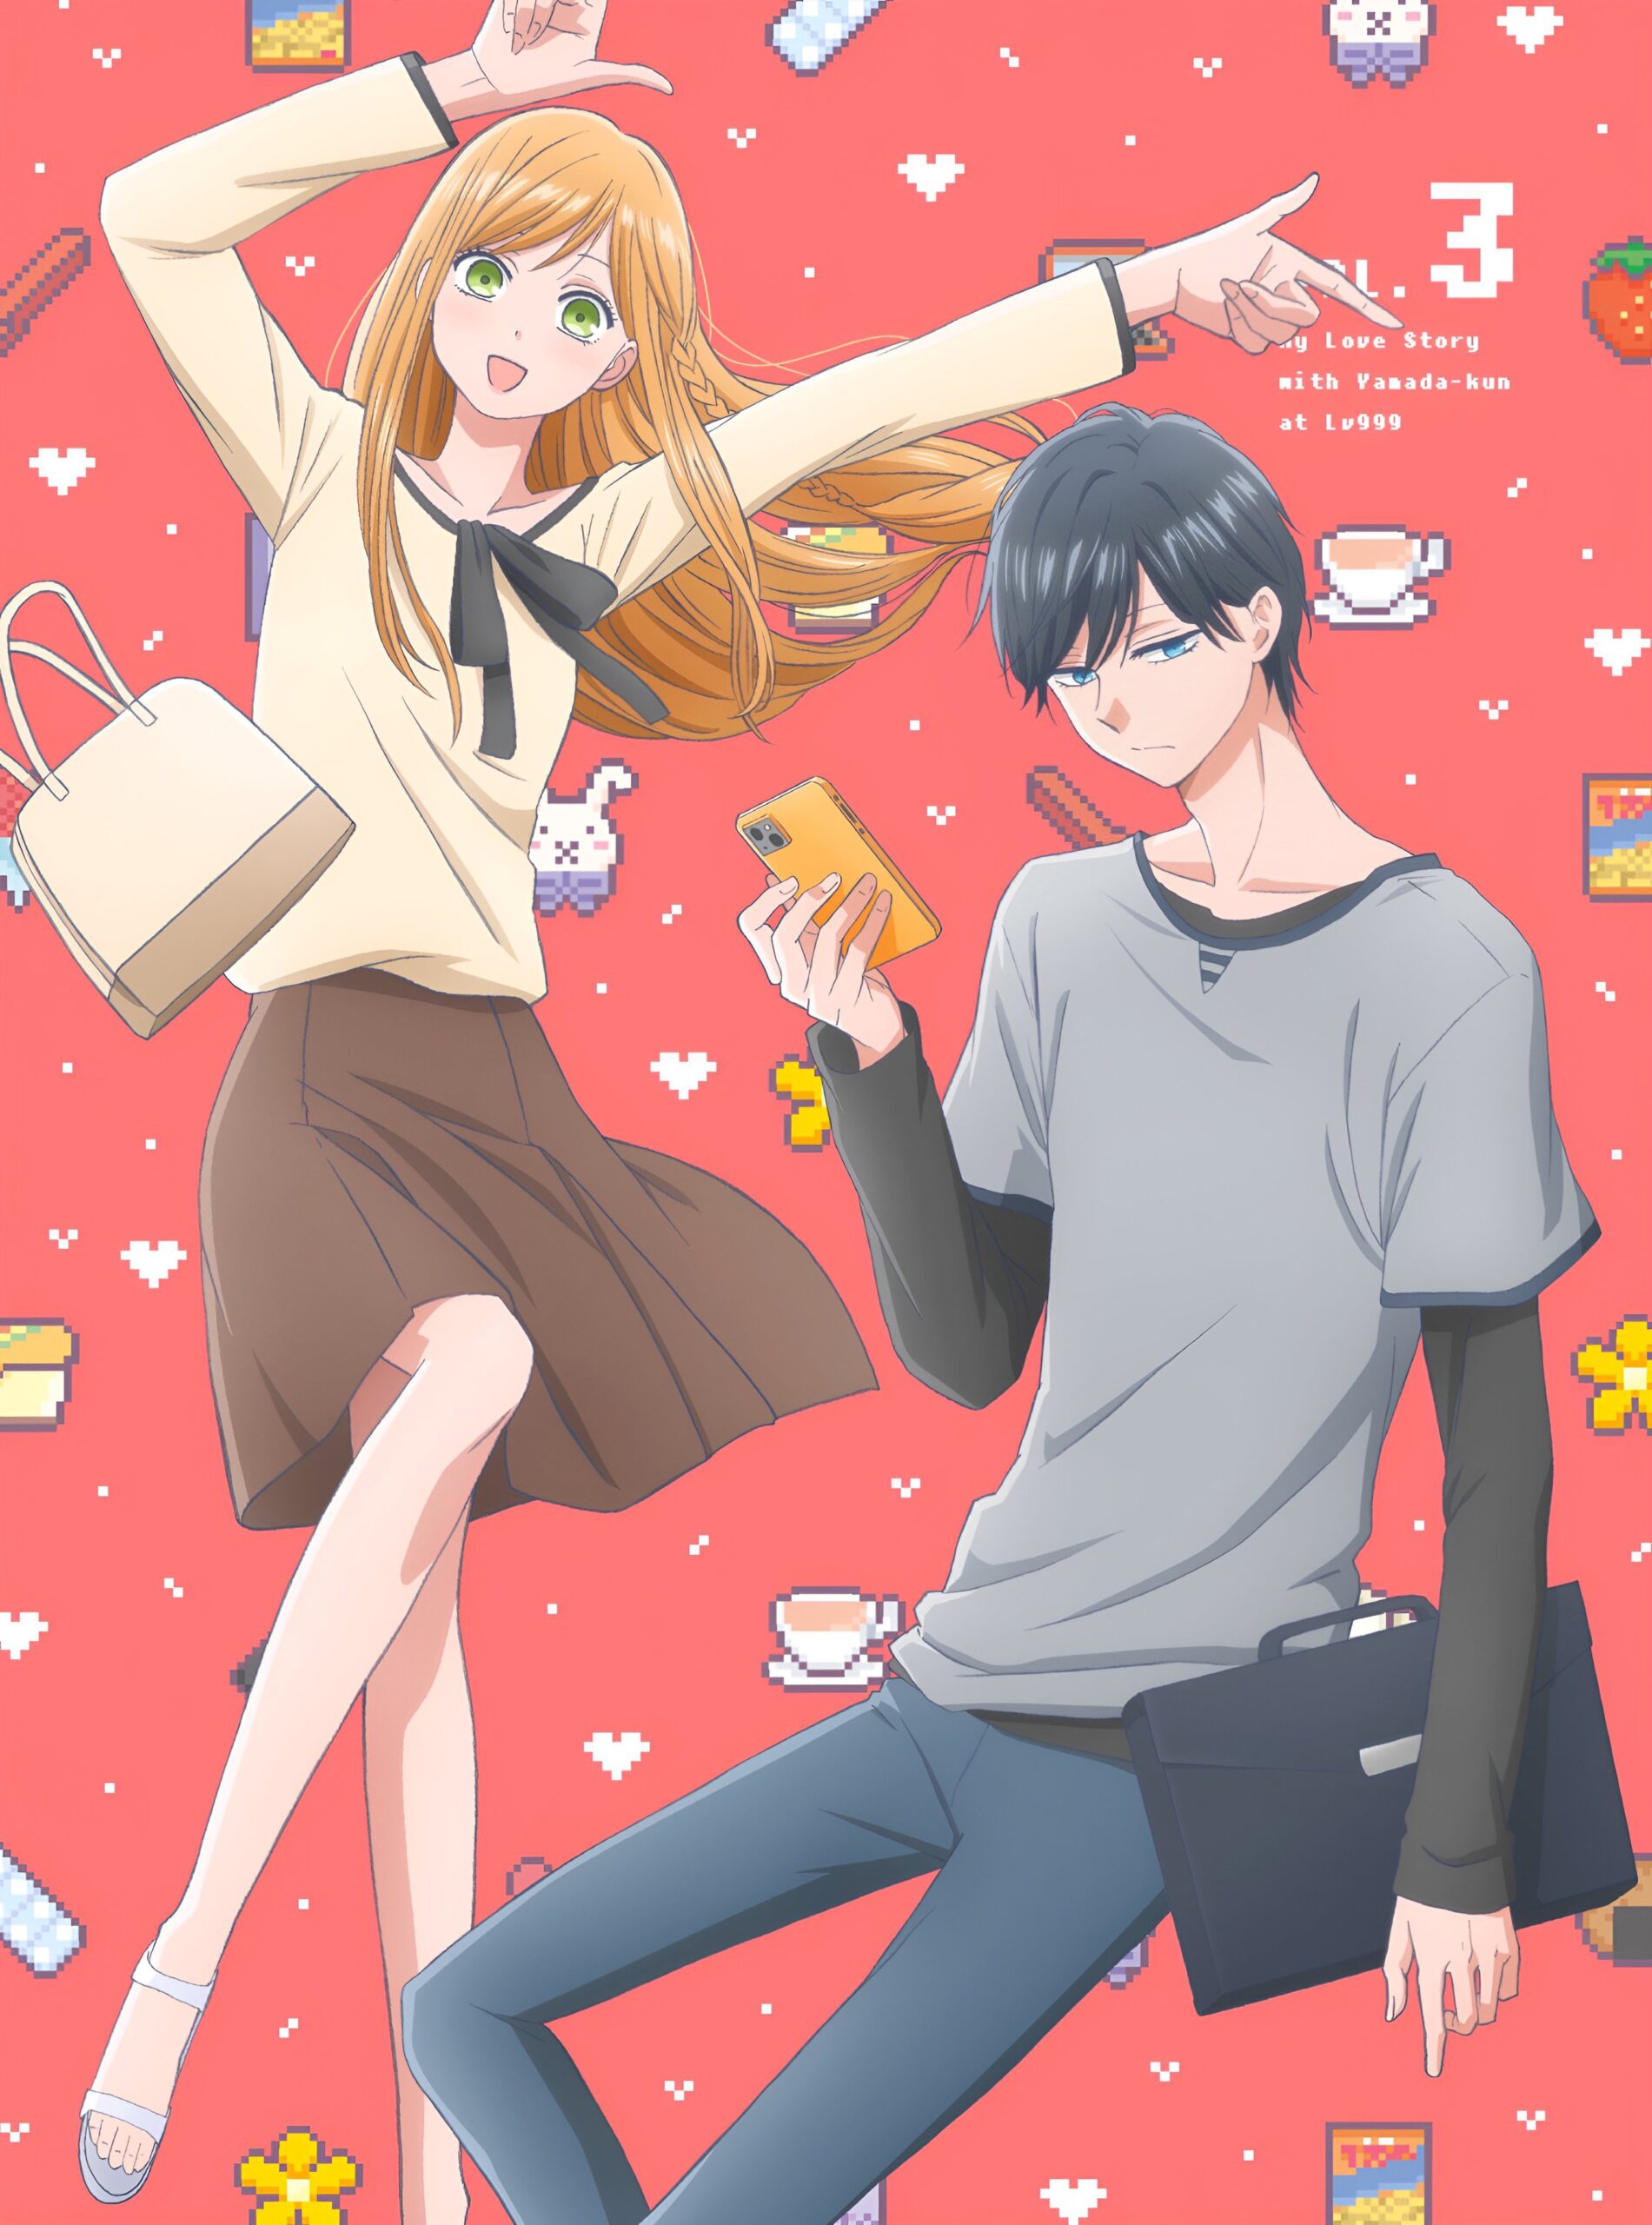 my love story with yamada-kun at lv999 from manga cover